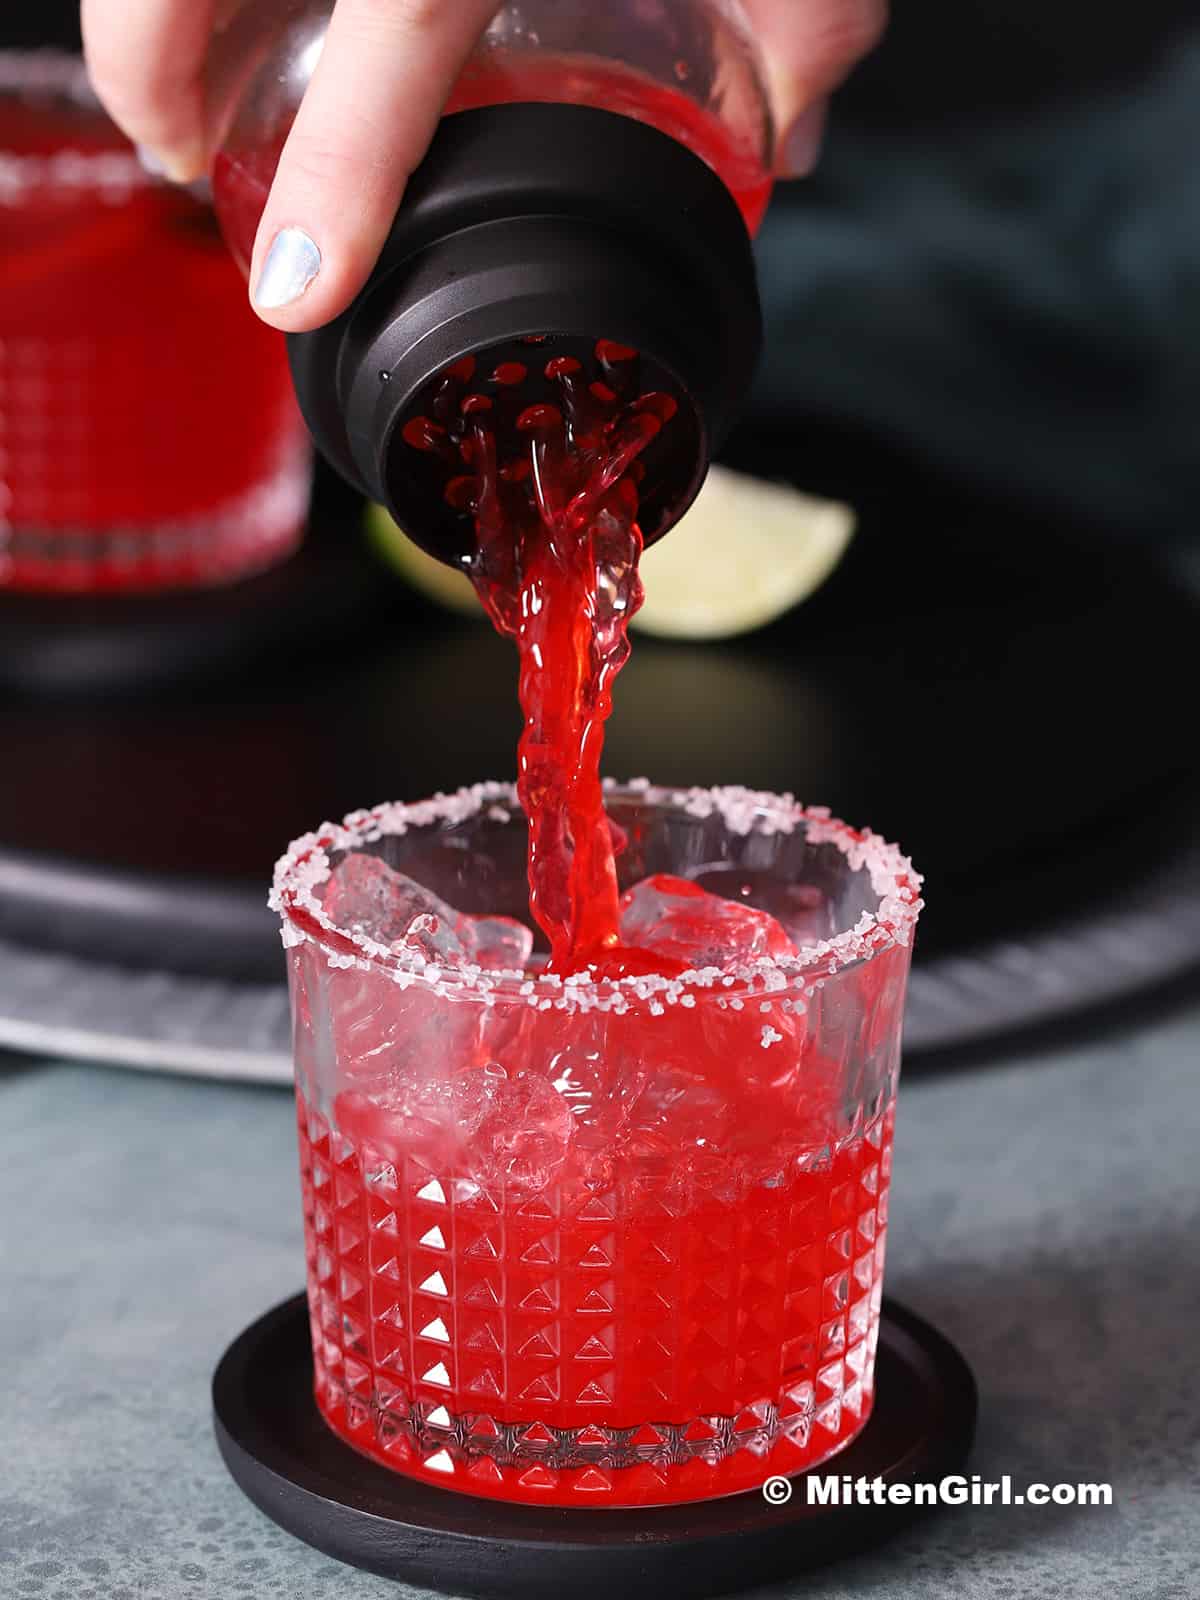 Blackberry margarita being poured into a glass.